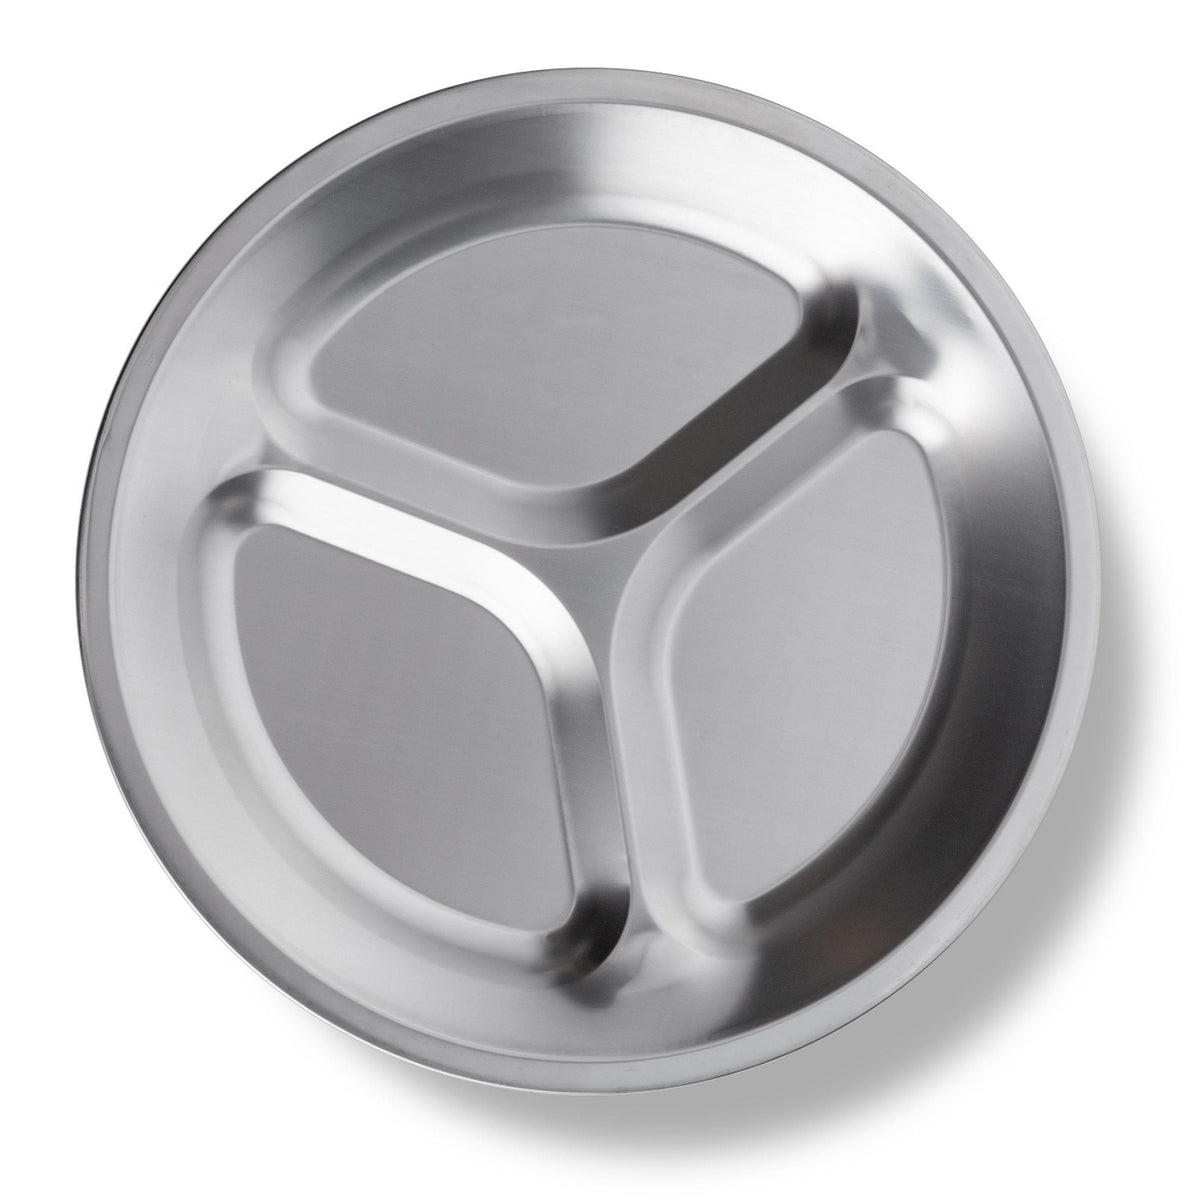 SHERCHPRY Plates Reusable Stainless Steel Divided